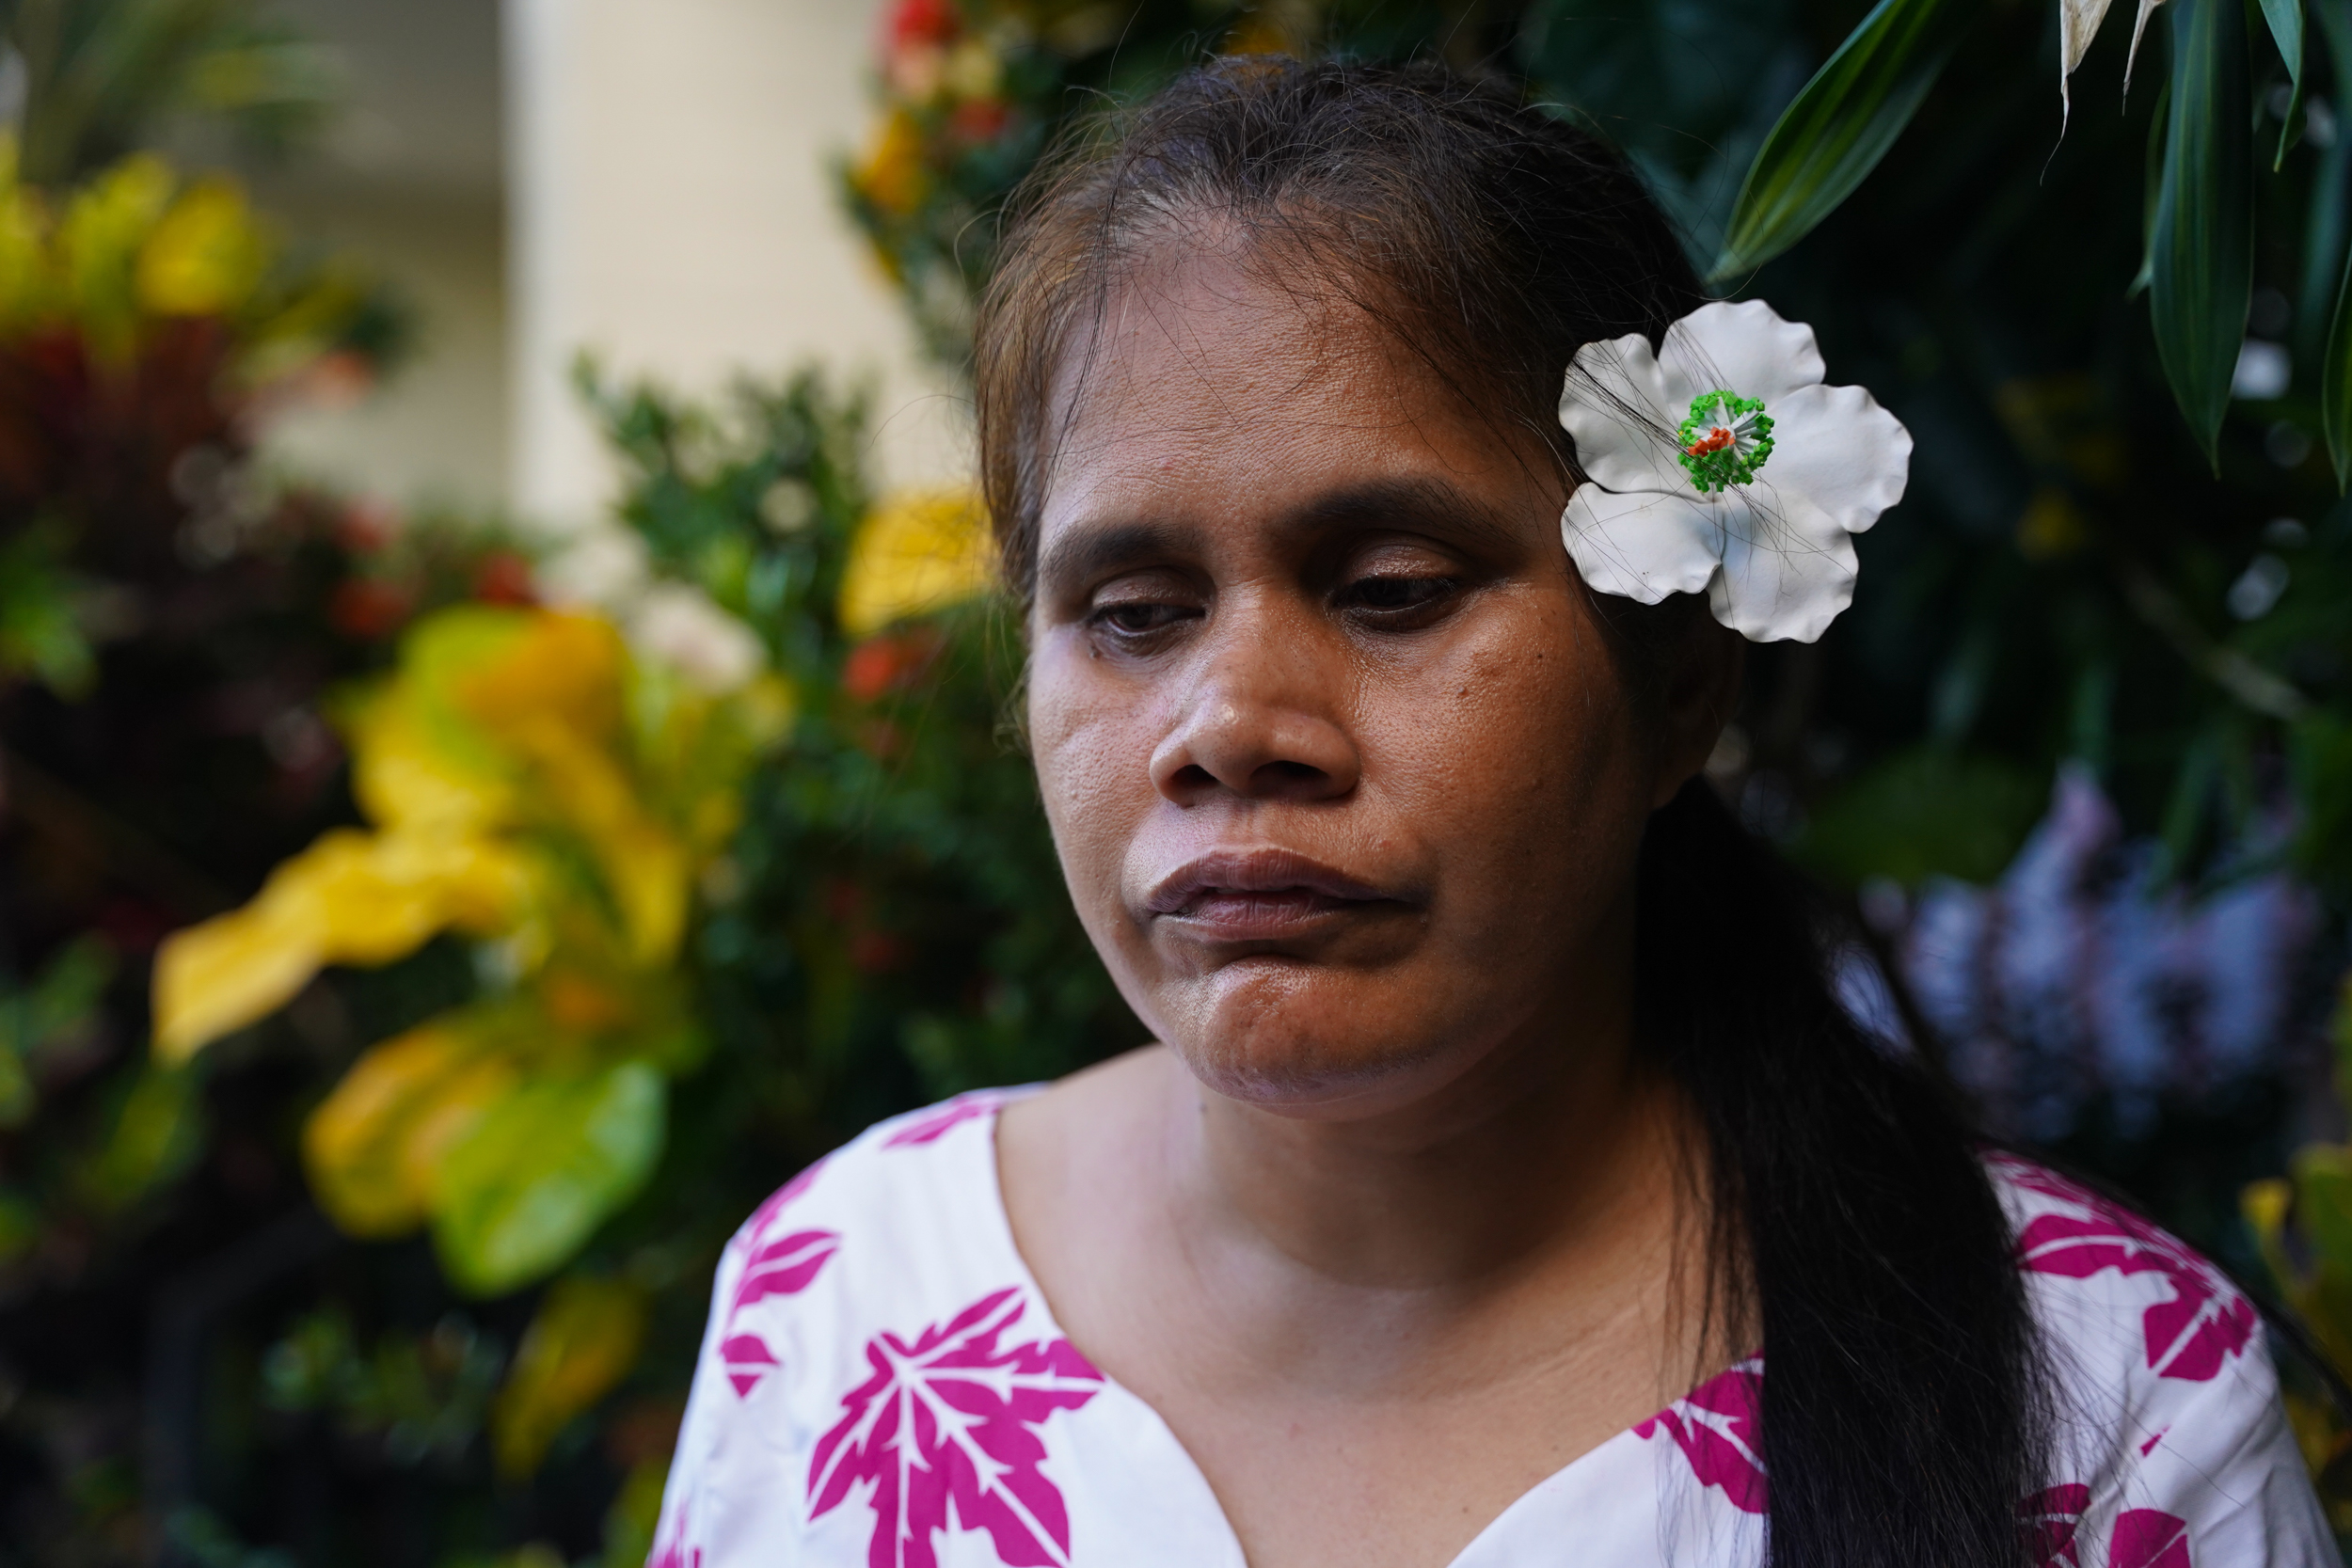 Faaolo Utumapu-Utailesolo stands in front of flowers with a contemplative look on her face.